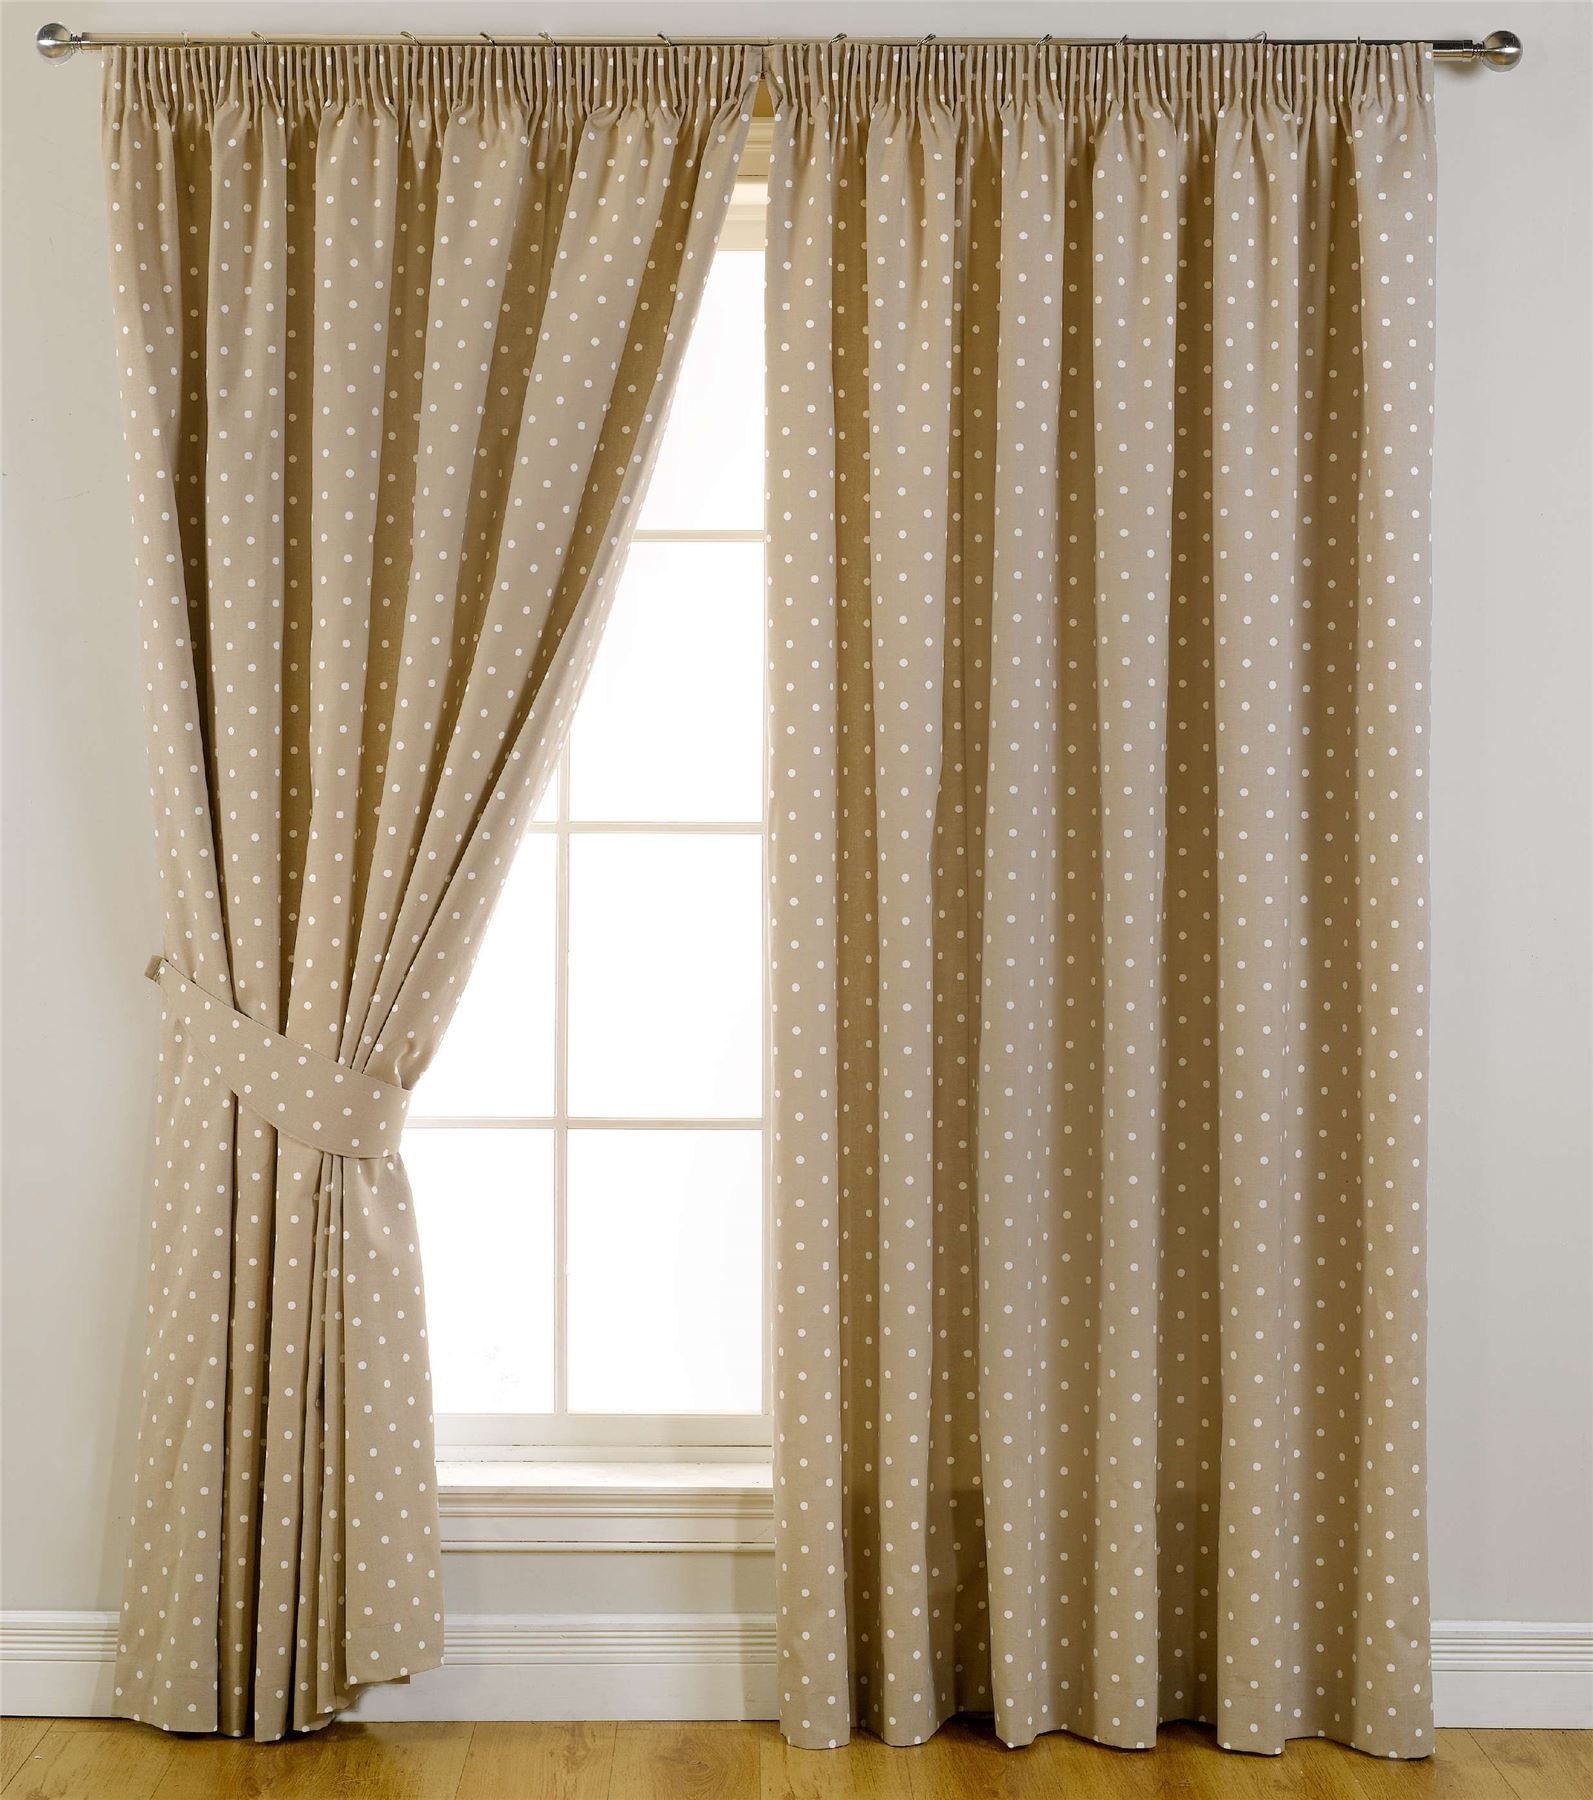 Dolly Blackout Curtains Polka Dots Pastel Spots Ready Made Pair Throughout Pencil Pleat Blackout Curtains (View 3 of 15)